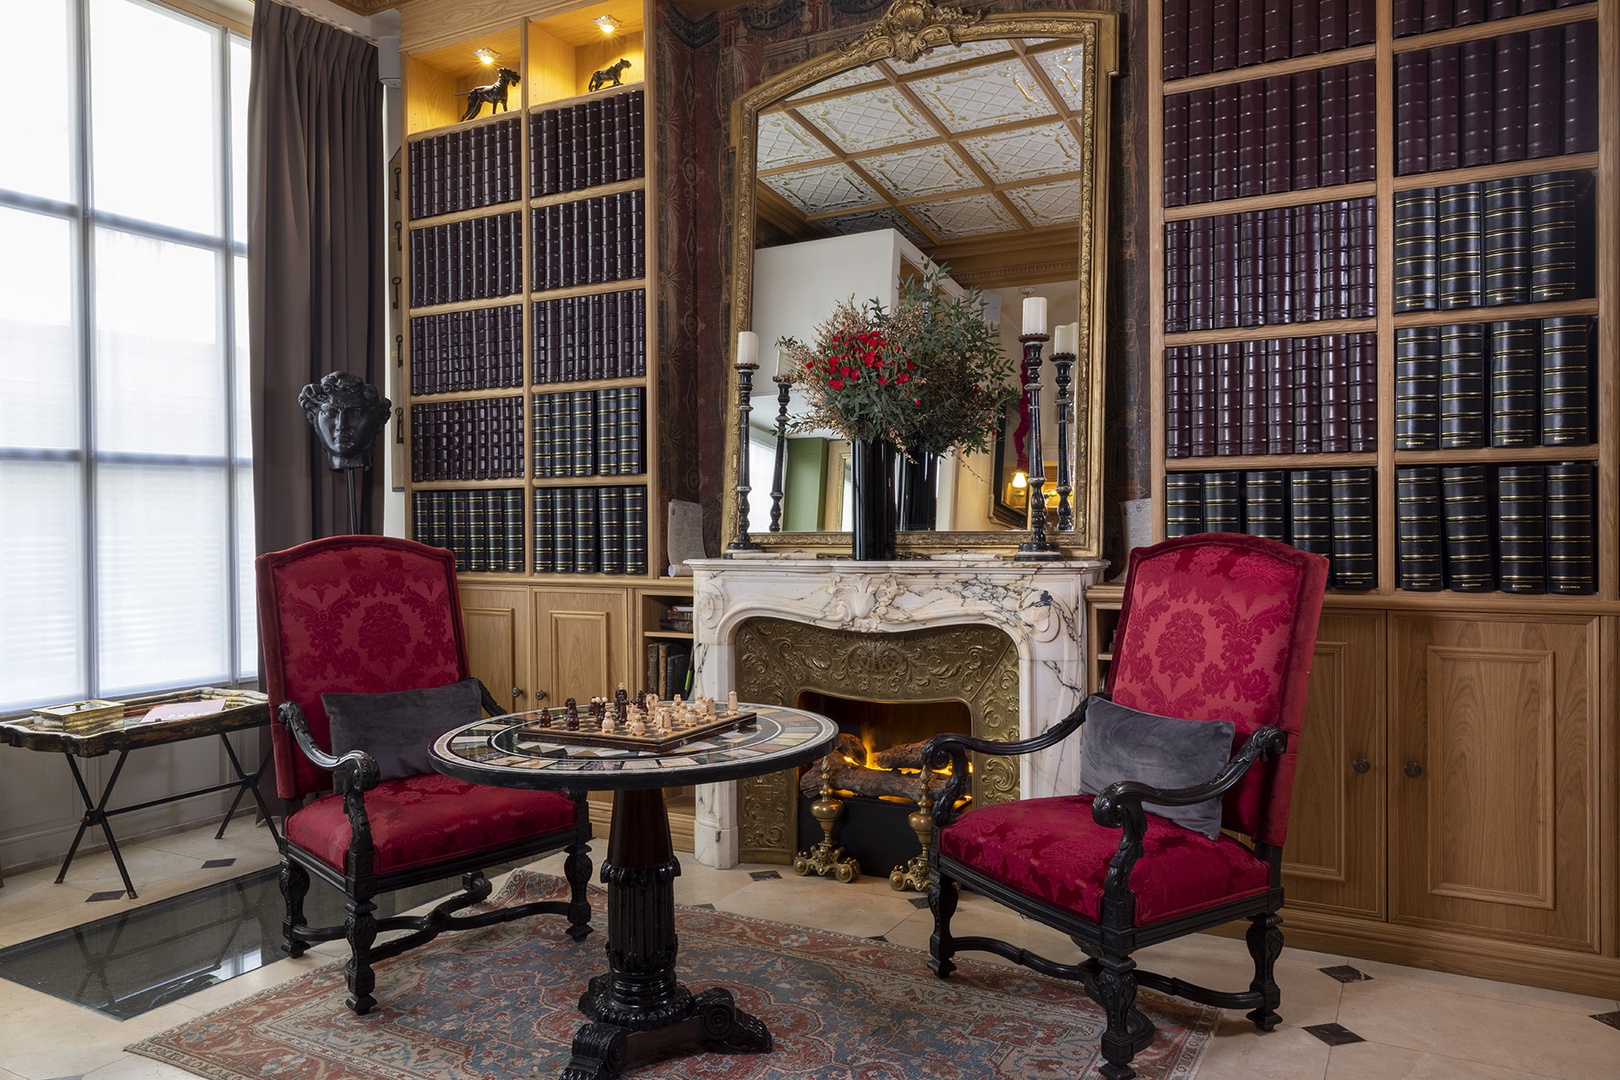 The sumptuous living room room of Vouvray.